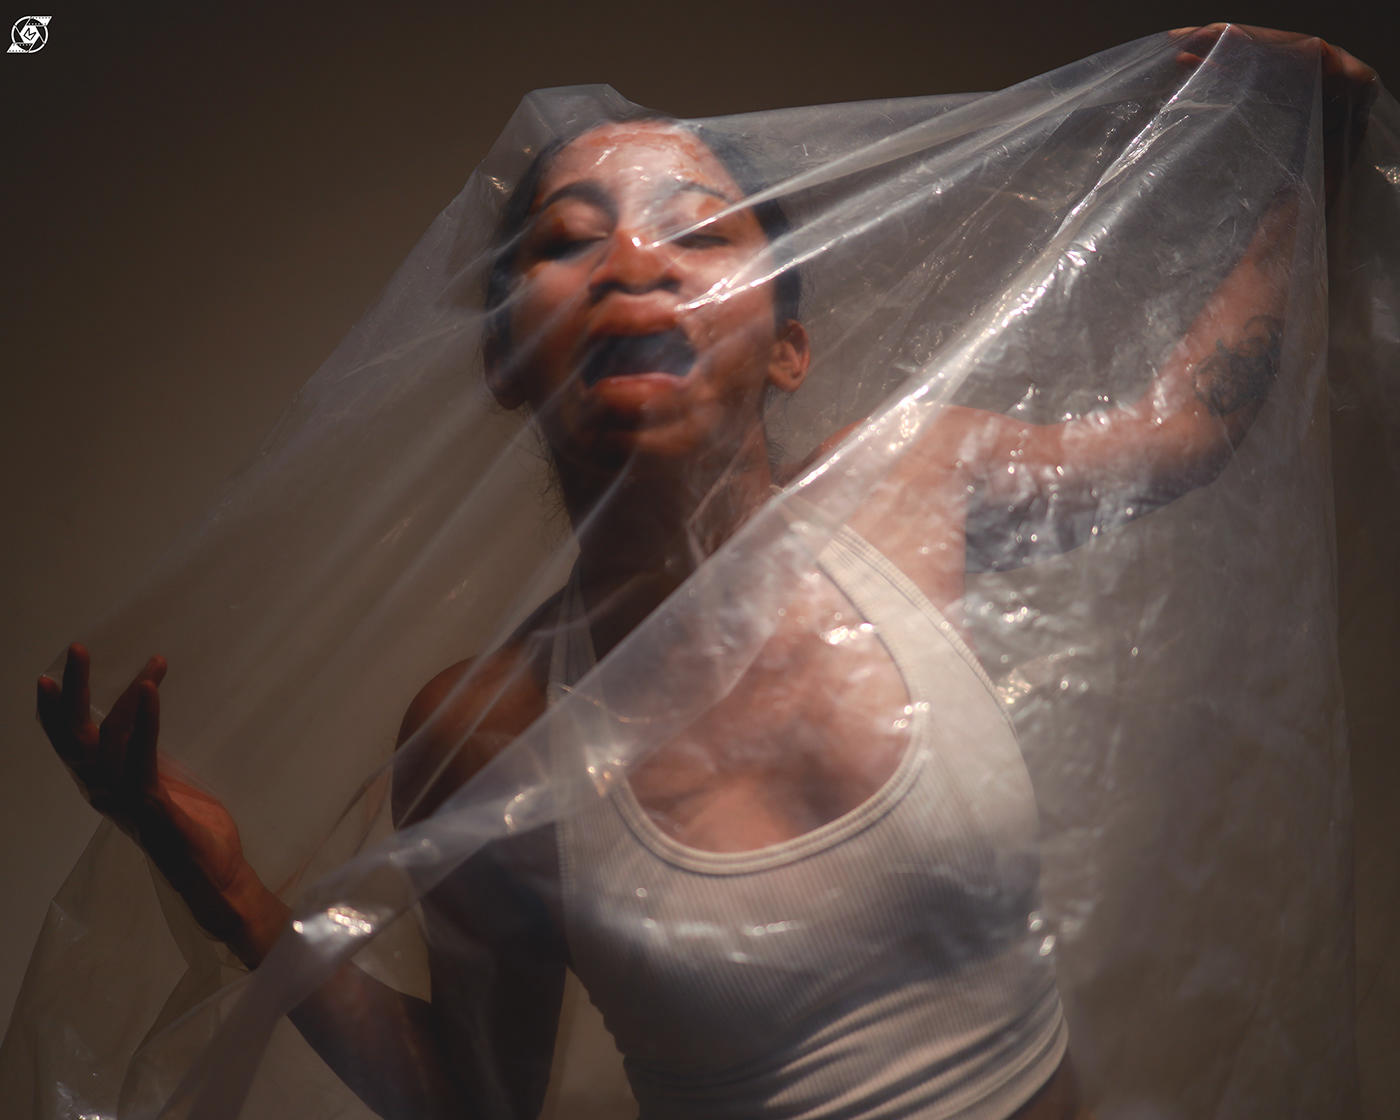 abstract artistic Canon experimental expressive person photoshoot plastic suffocated woman